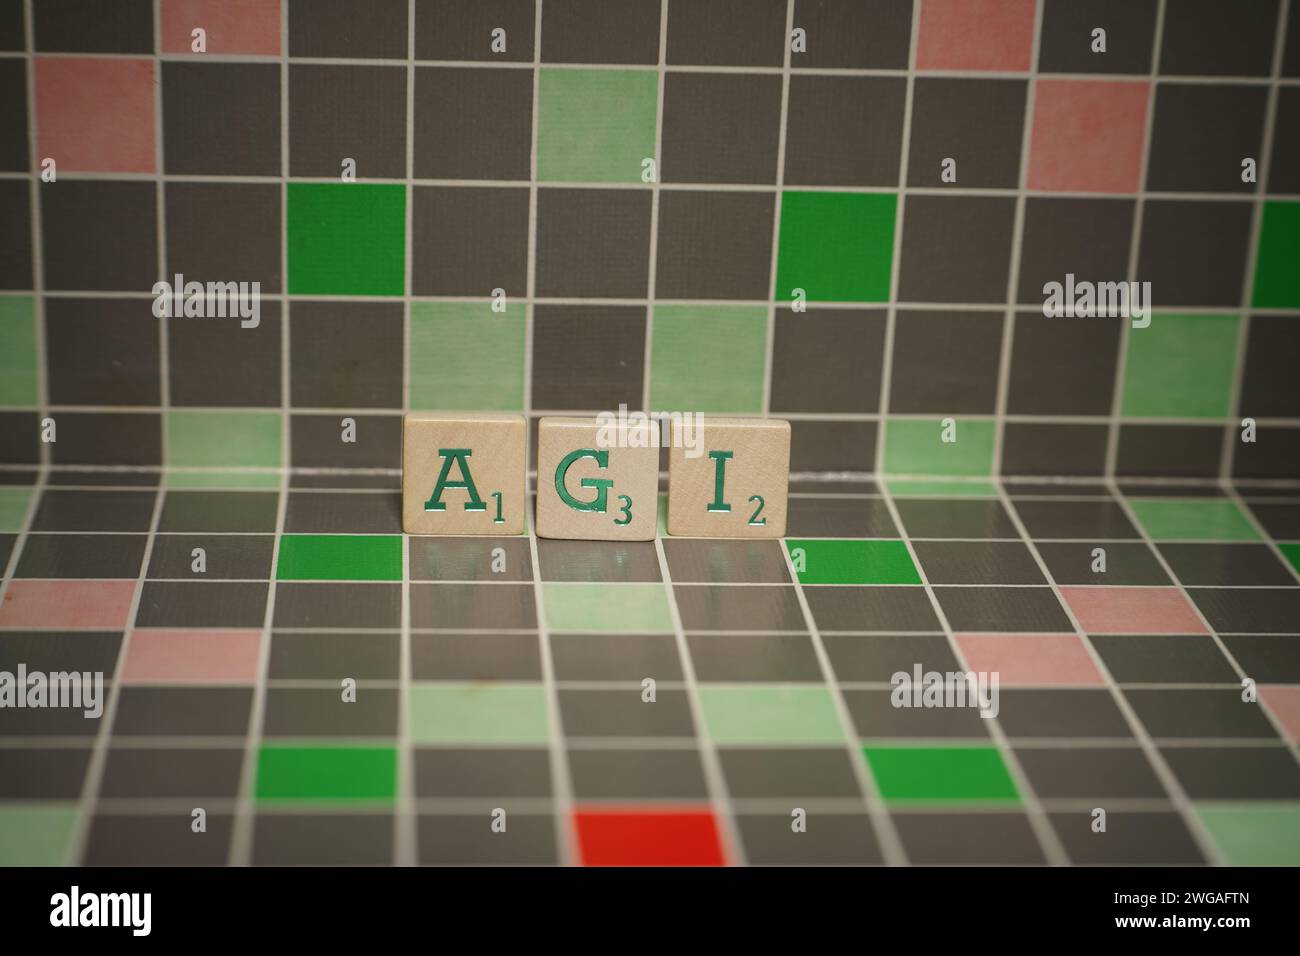 Wooden tile with green agi text on a blocked background Stock Photo